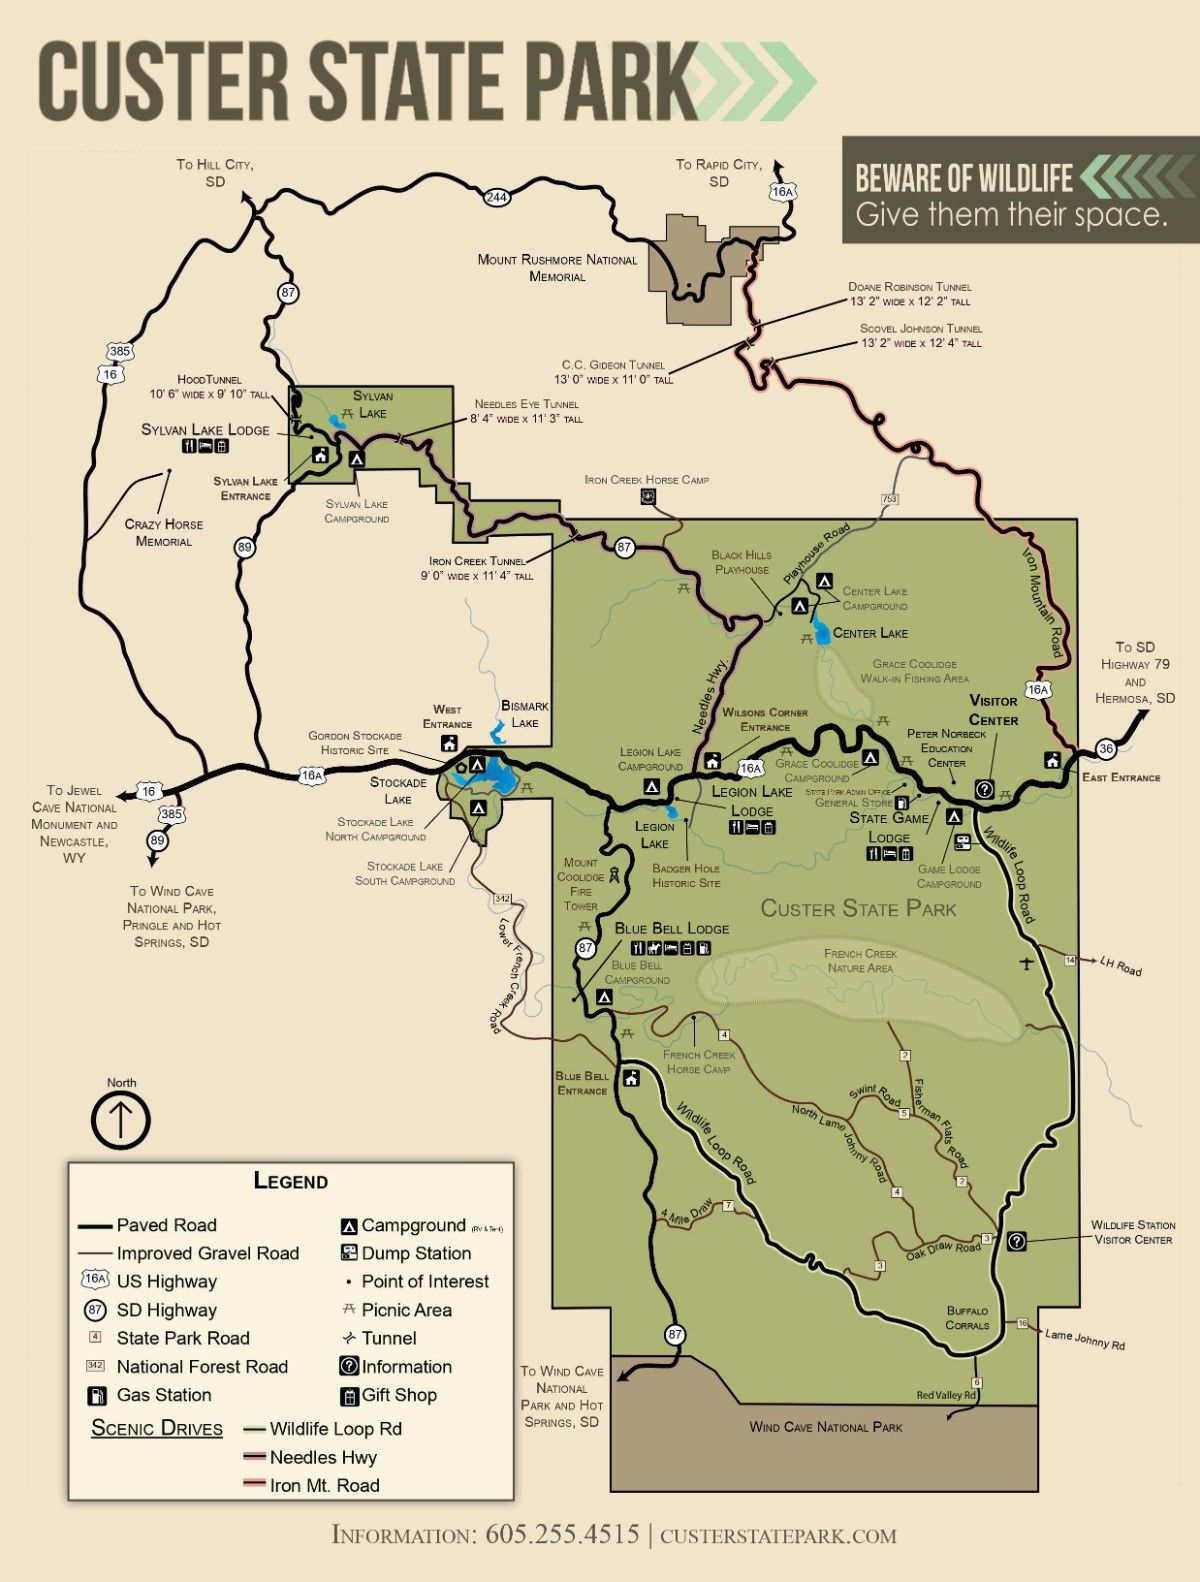 Map showing the layout of Custer State Park with its attractions and lodging